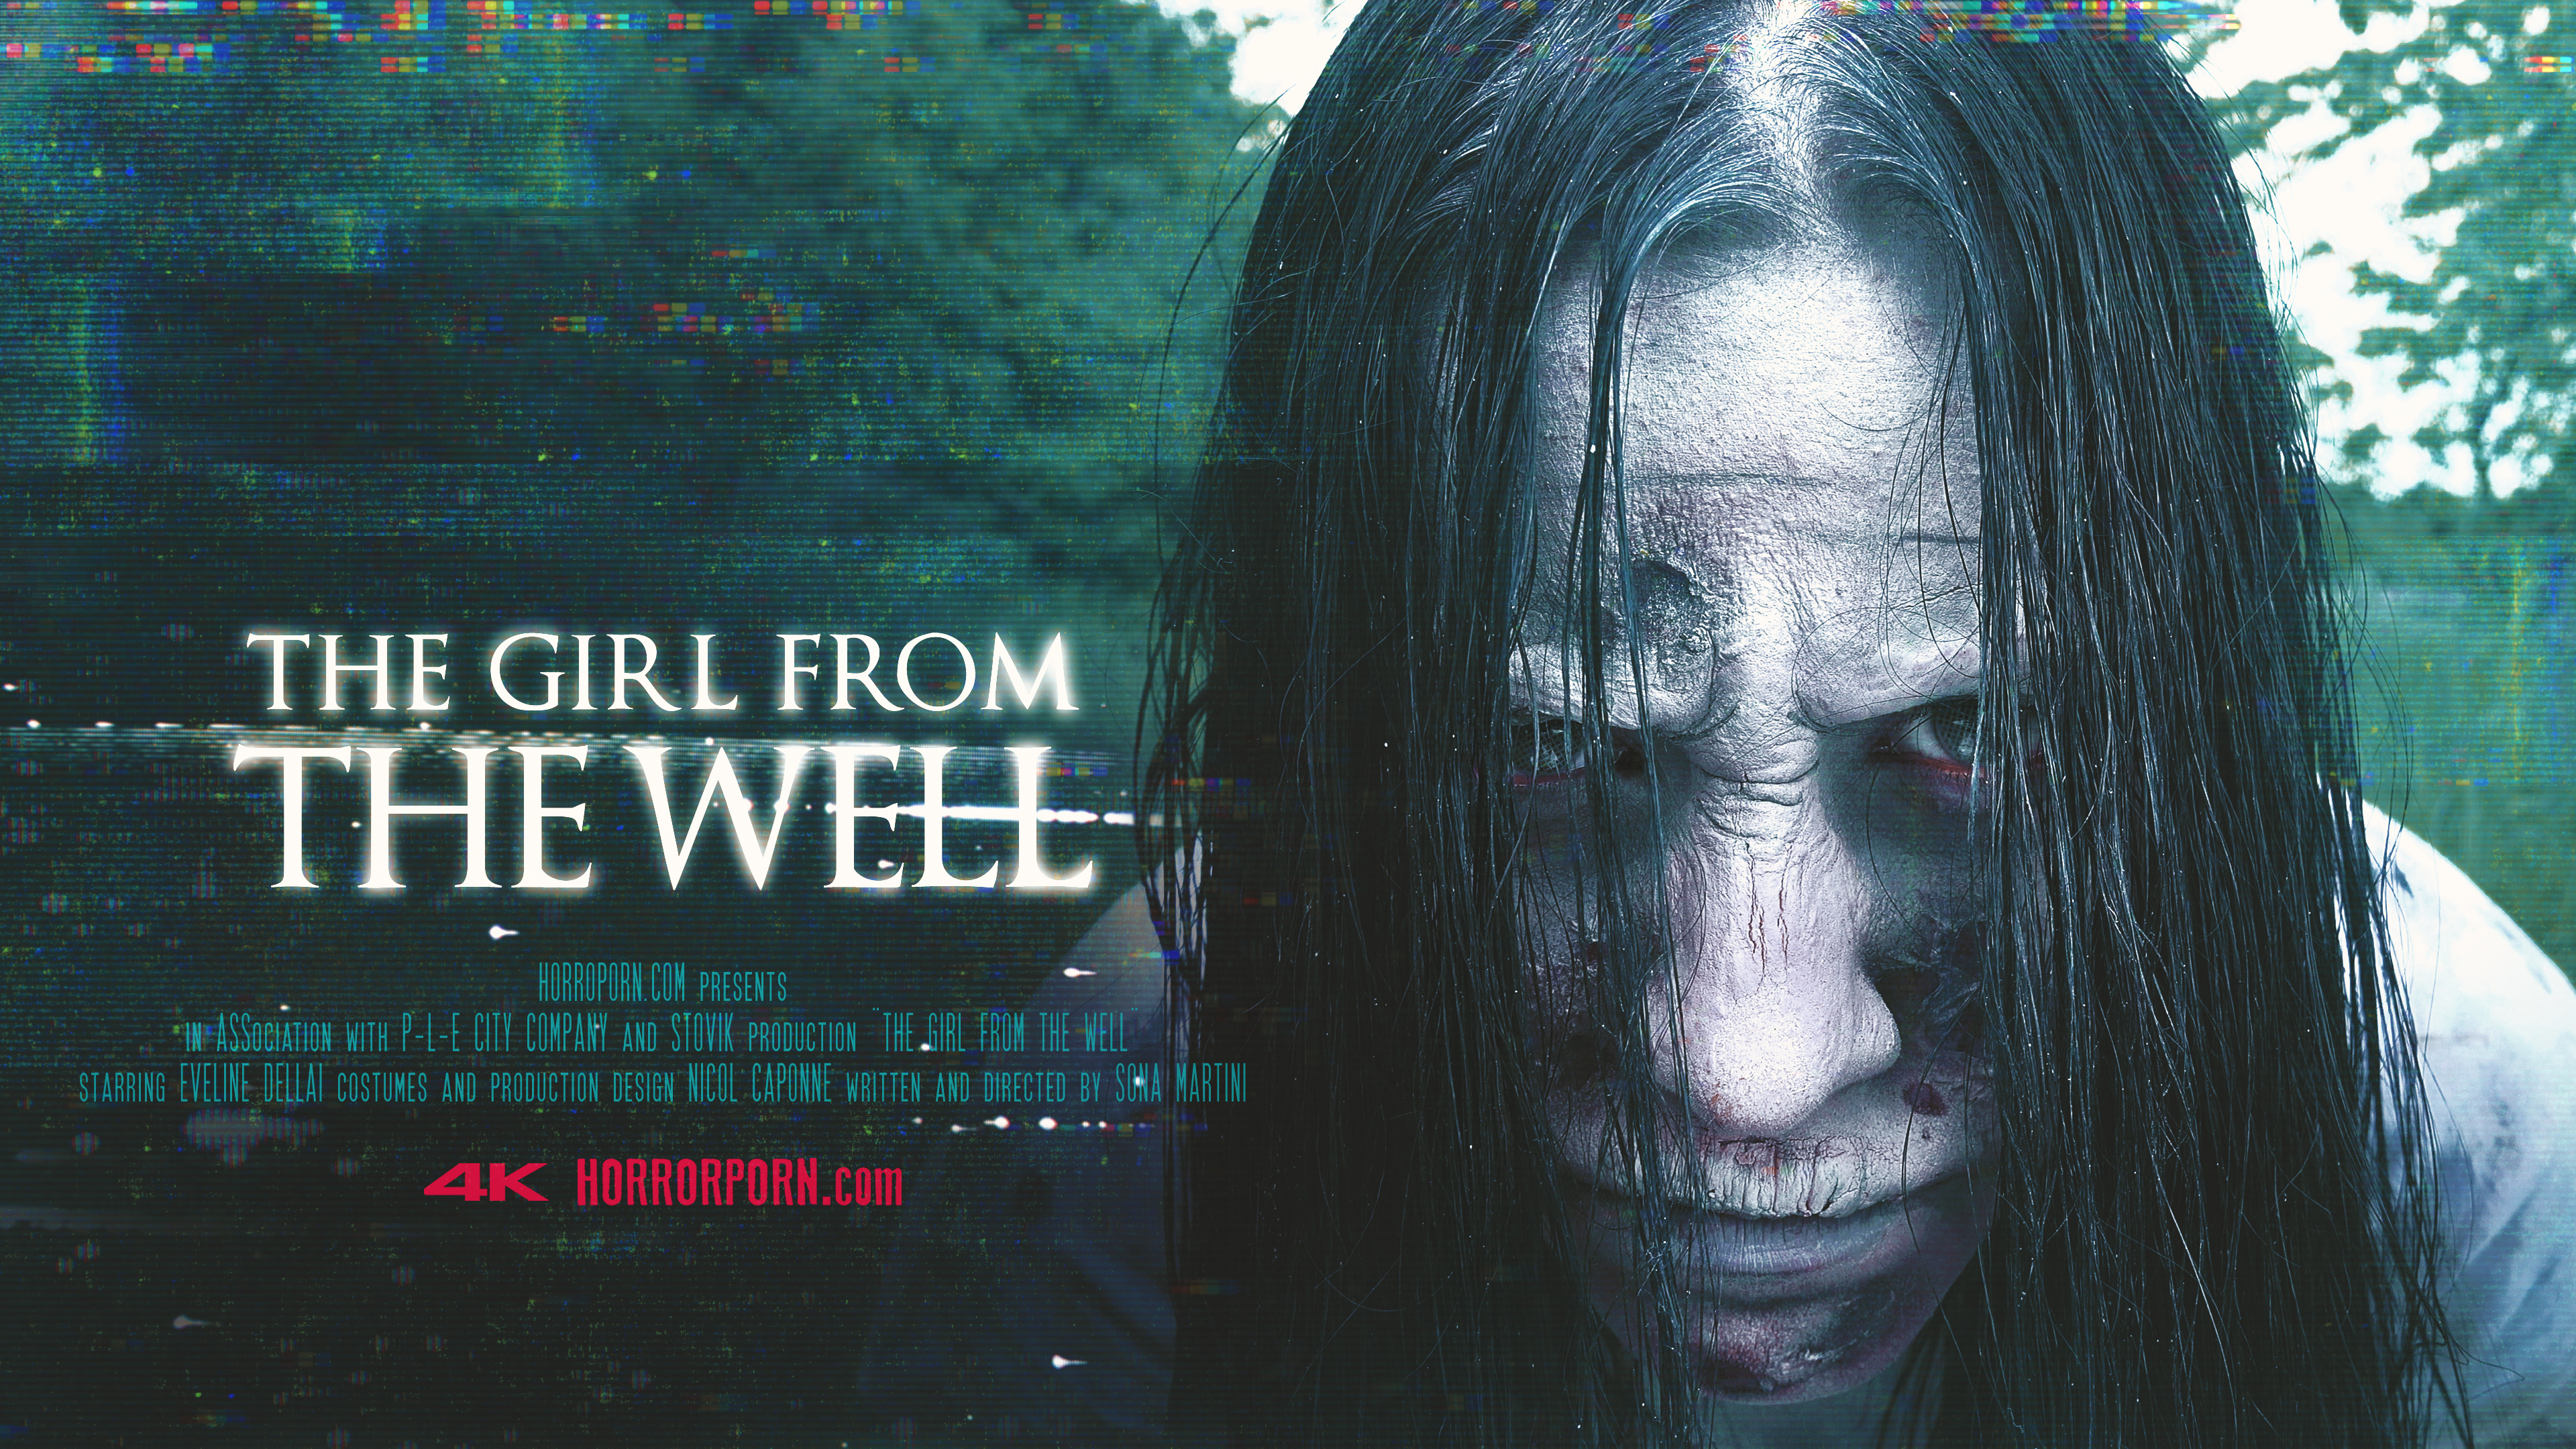 HORROR PORN – The Girl from The Well